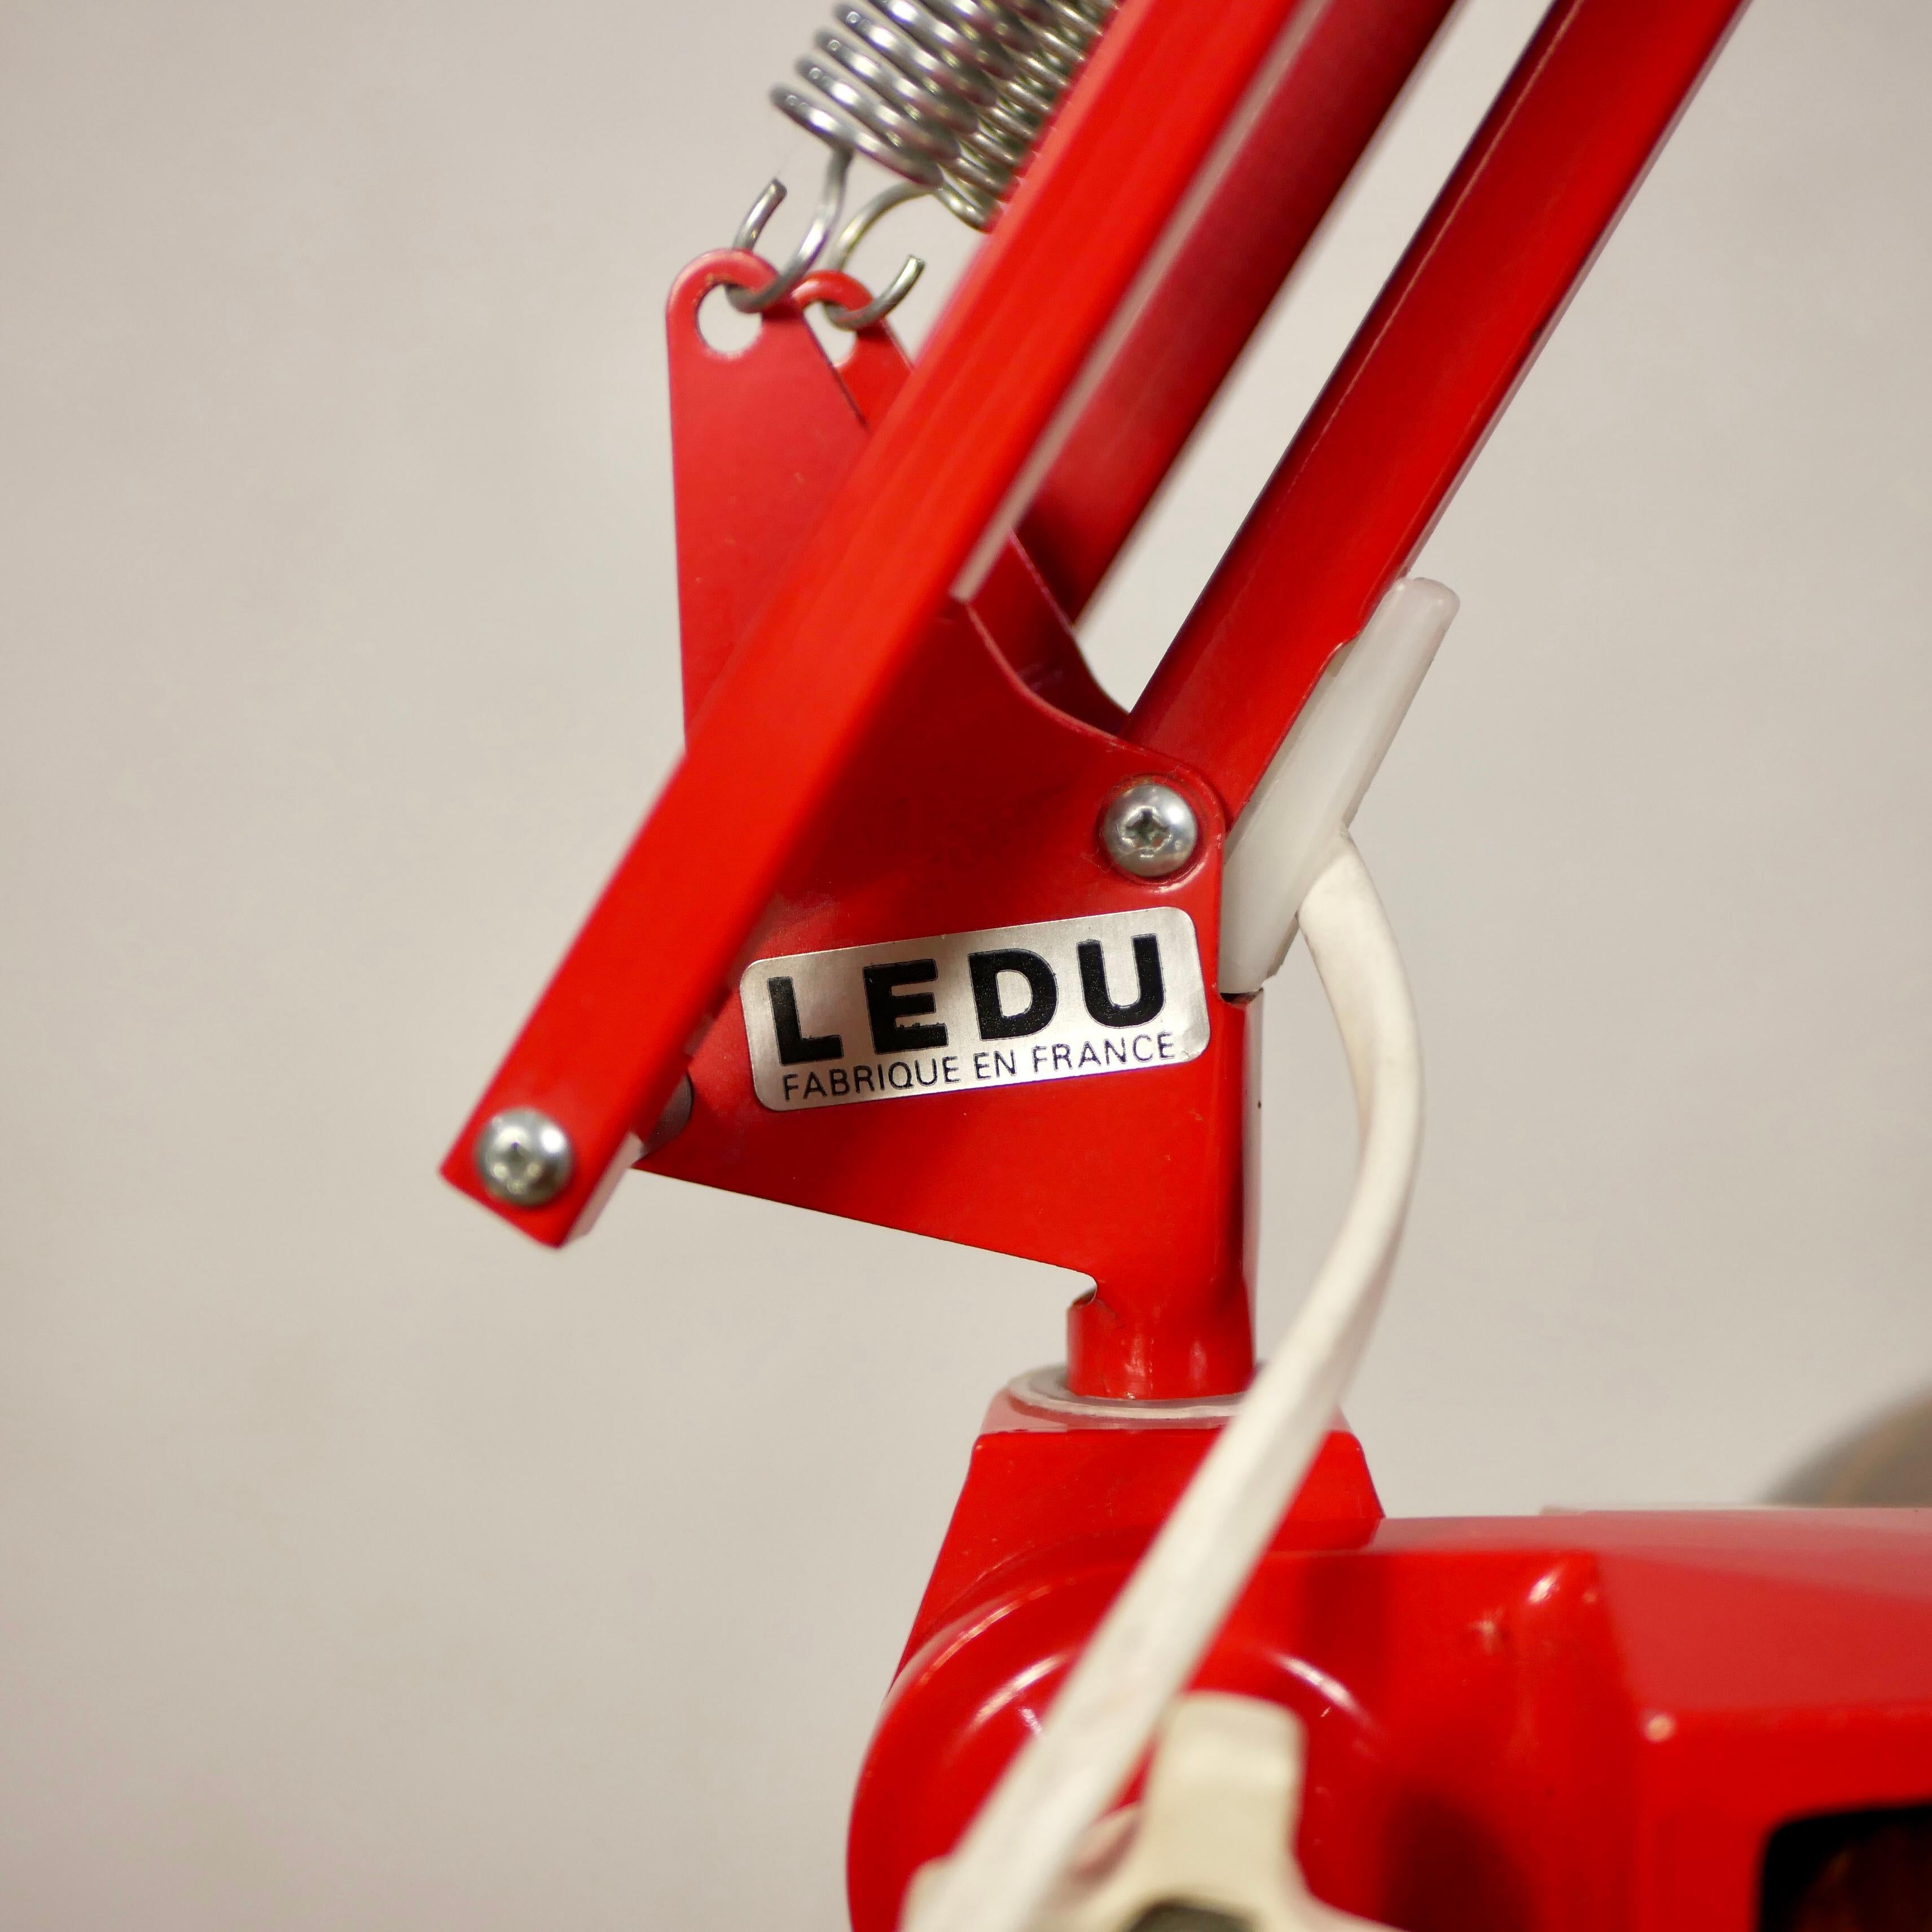 Late 20th Century Red Articulated Desk Lamp by Ledu, Made in, France